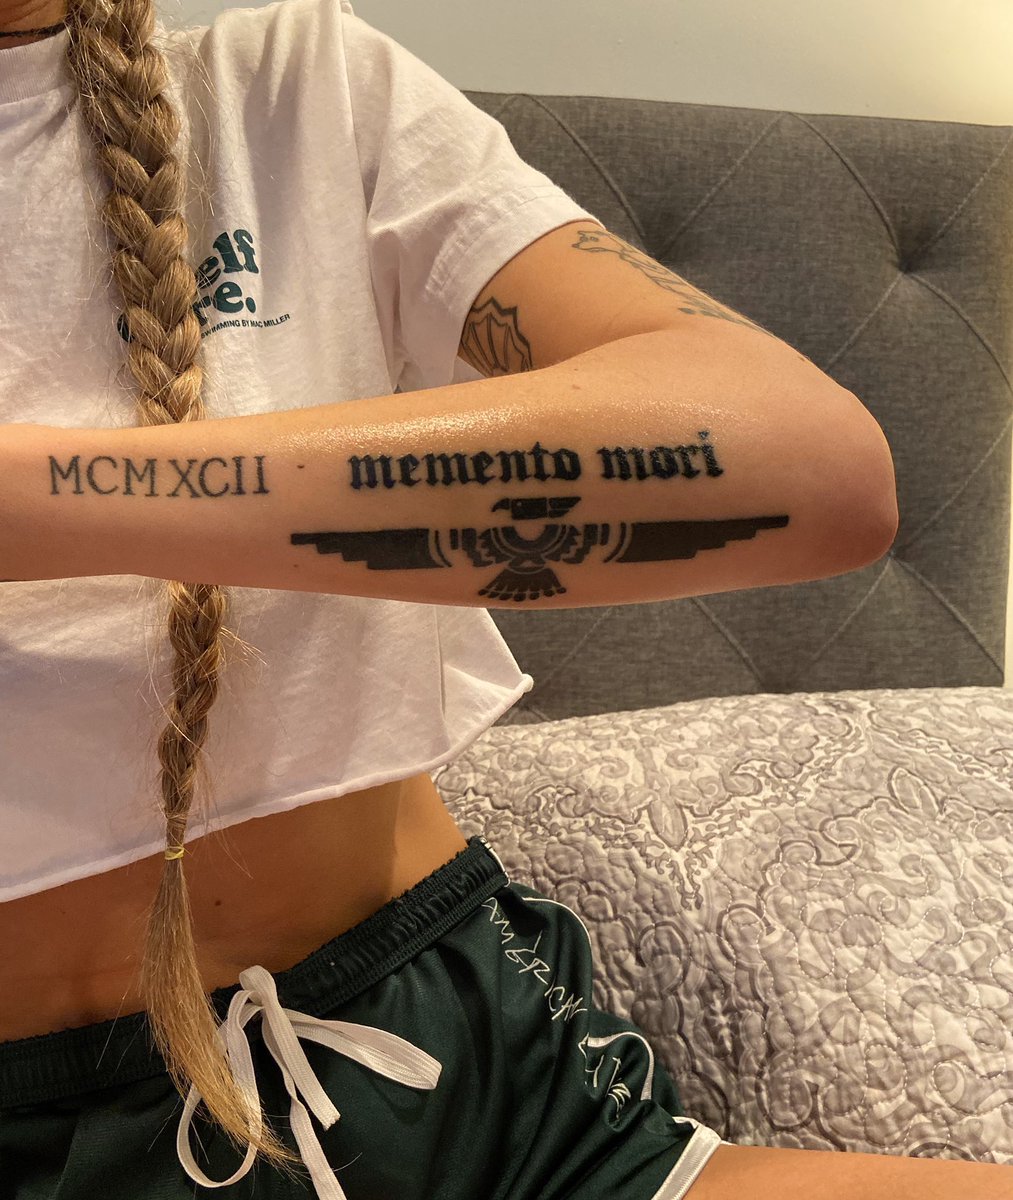 Got some special Mac tattoos today while I got my half sleeve finished   ripmac  rMacMiller